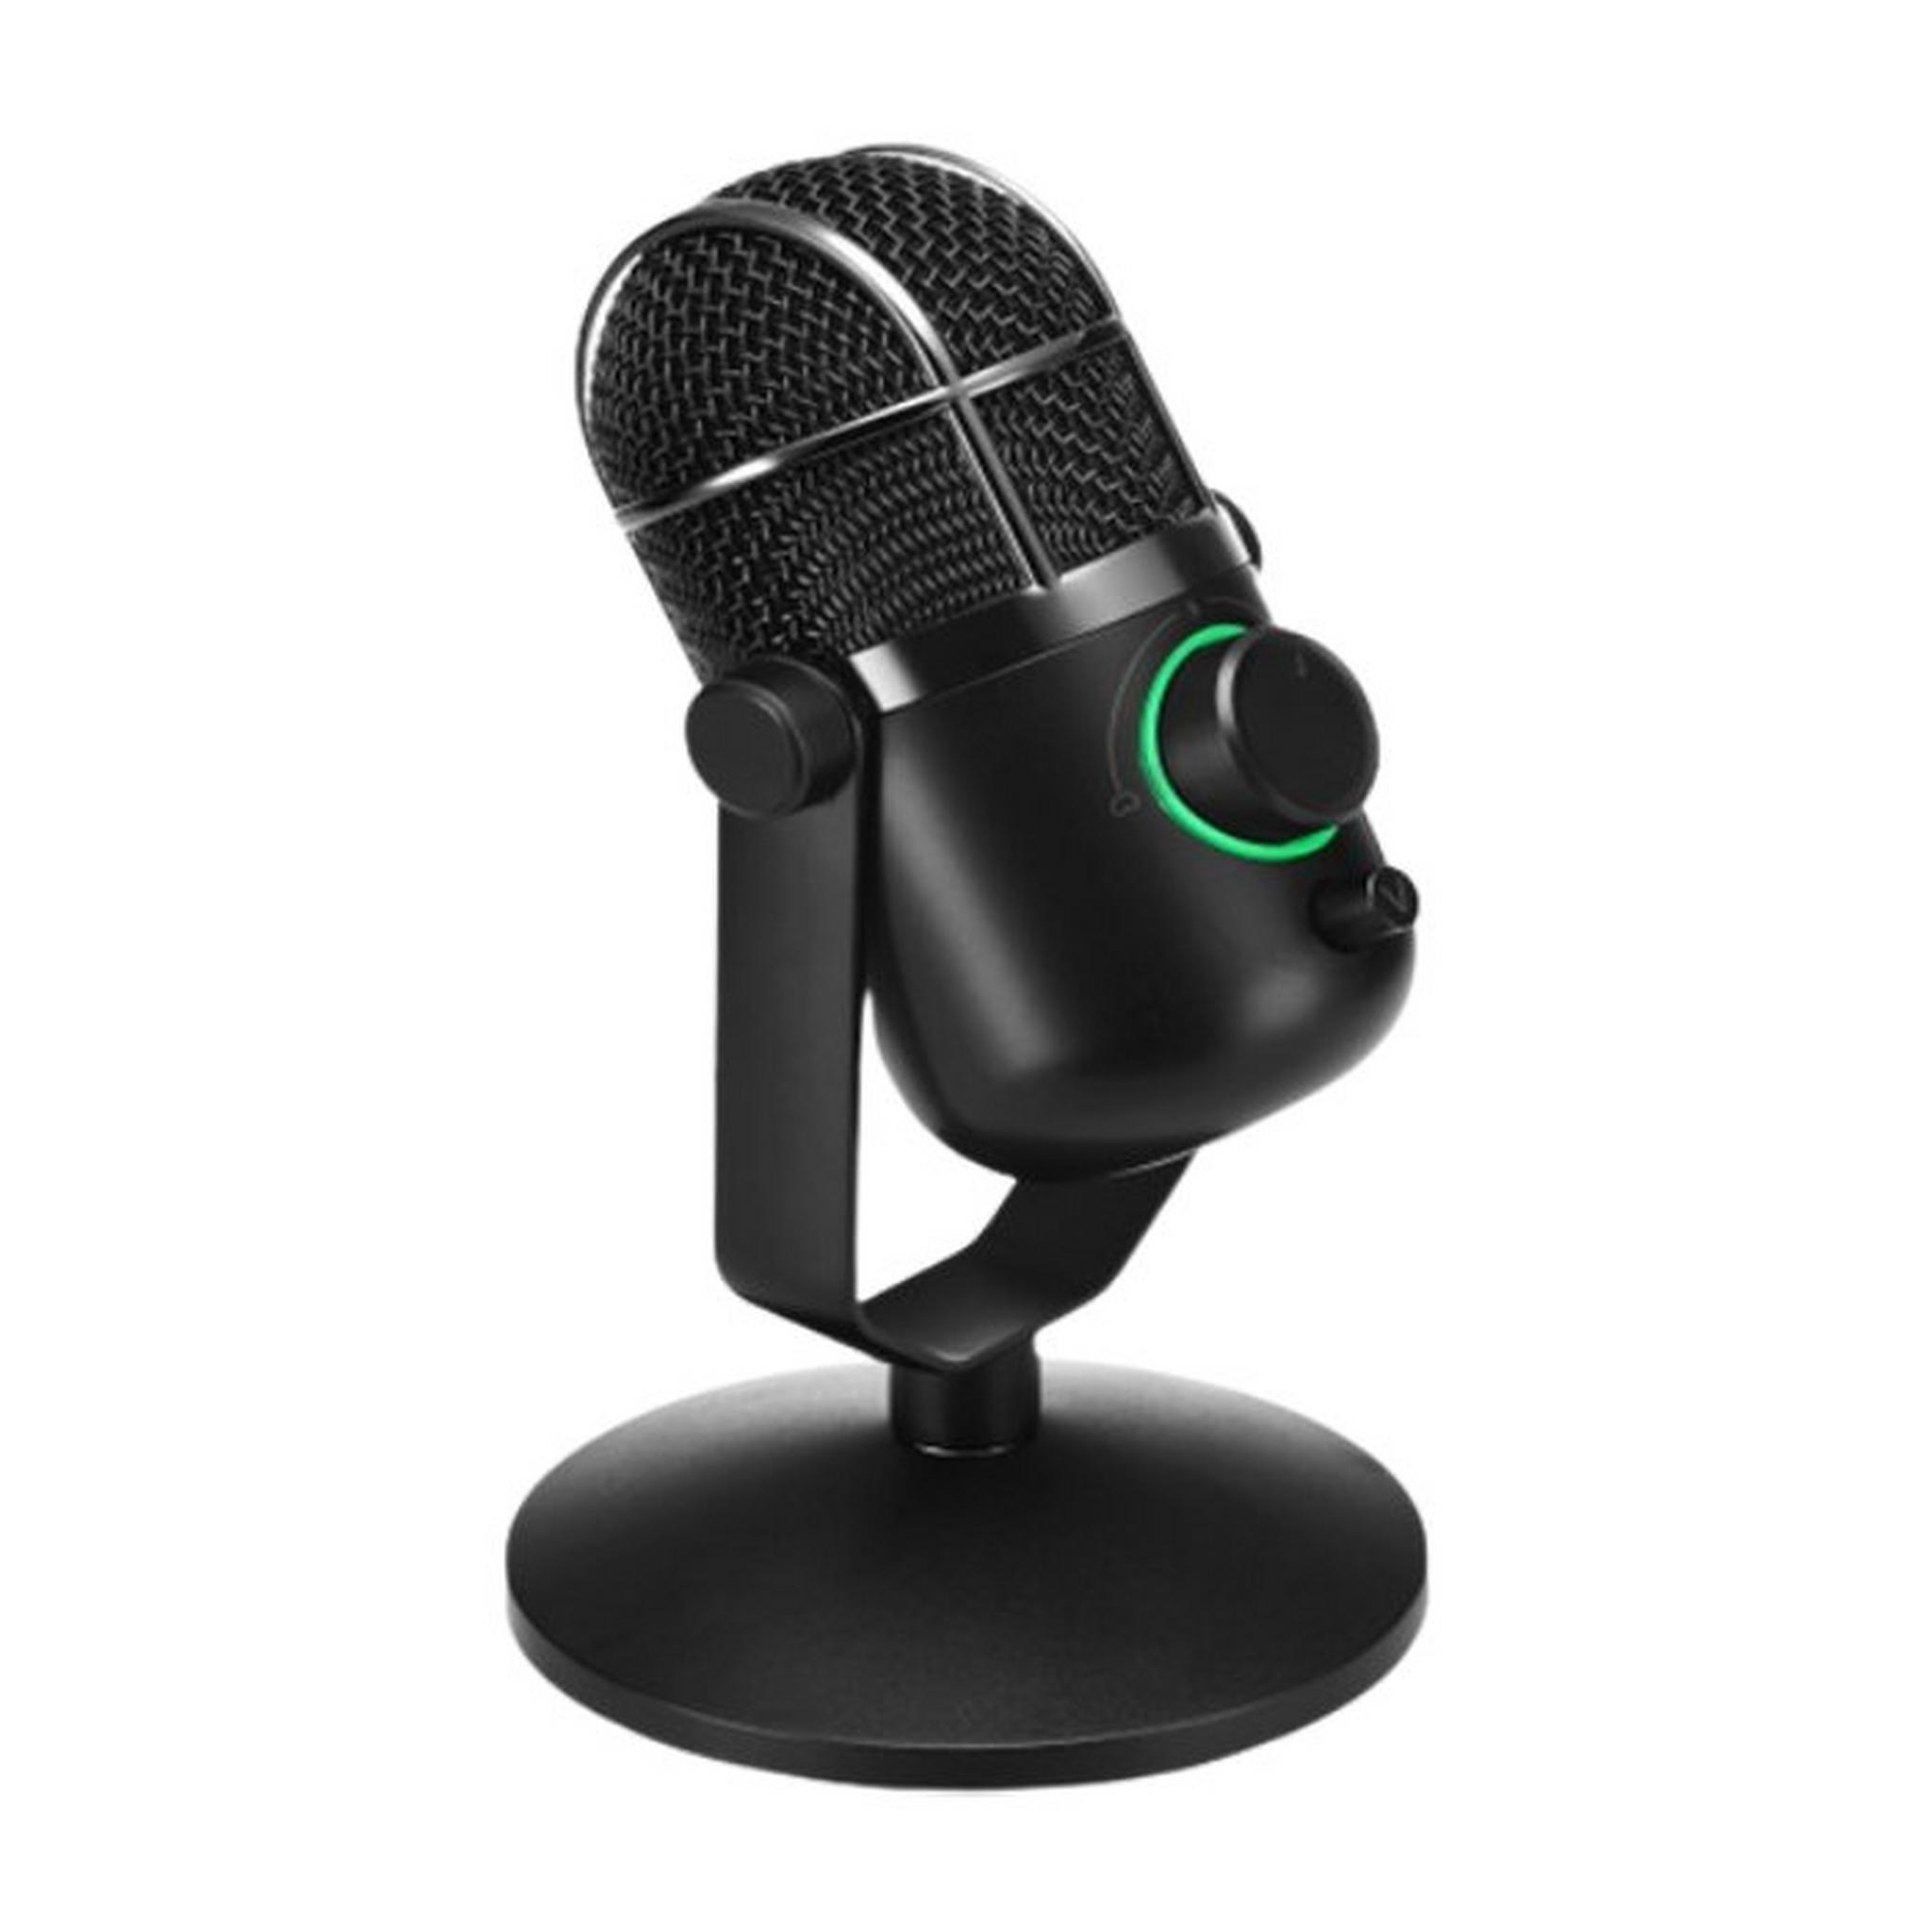 Thronmax MDrill Dome Plus USB Streaming Microphone -  Jet Black